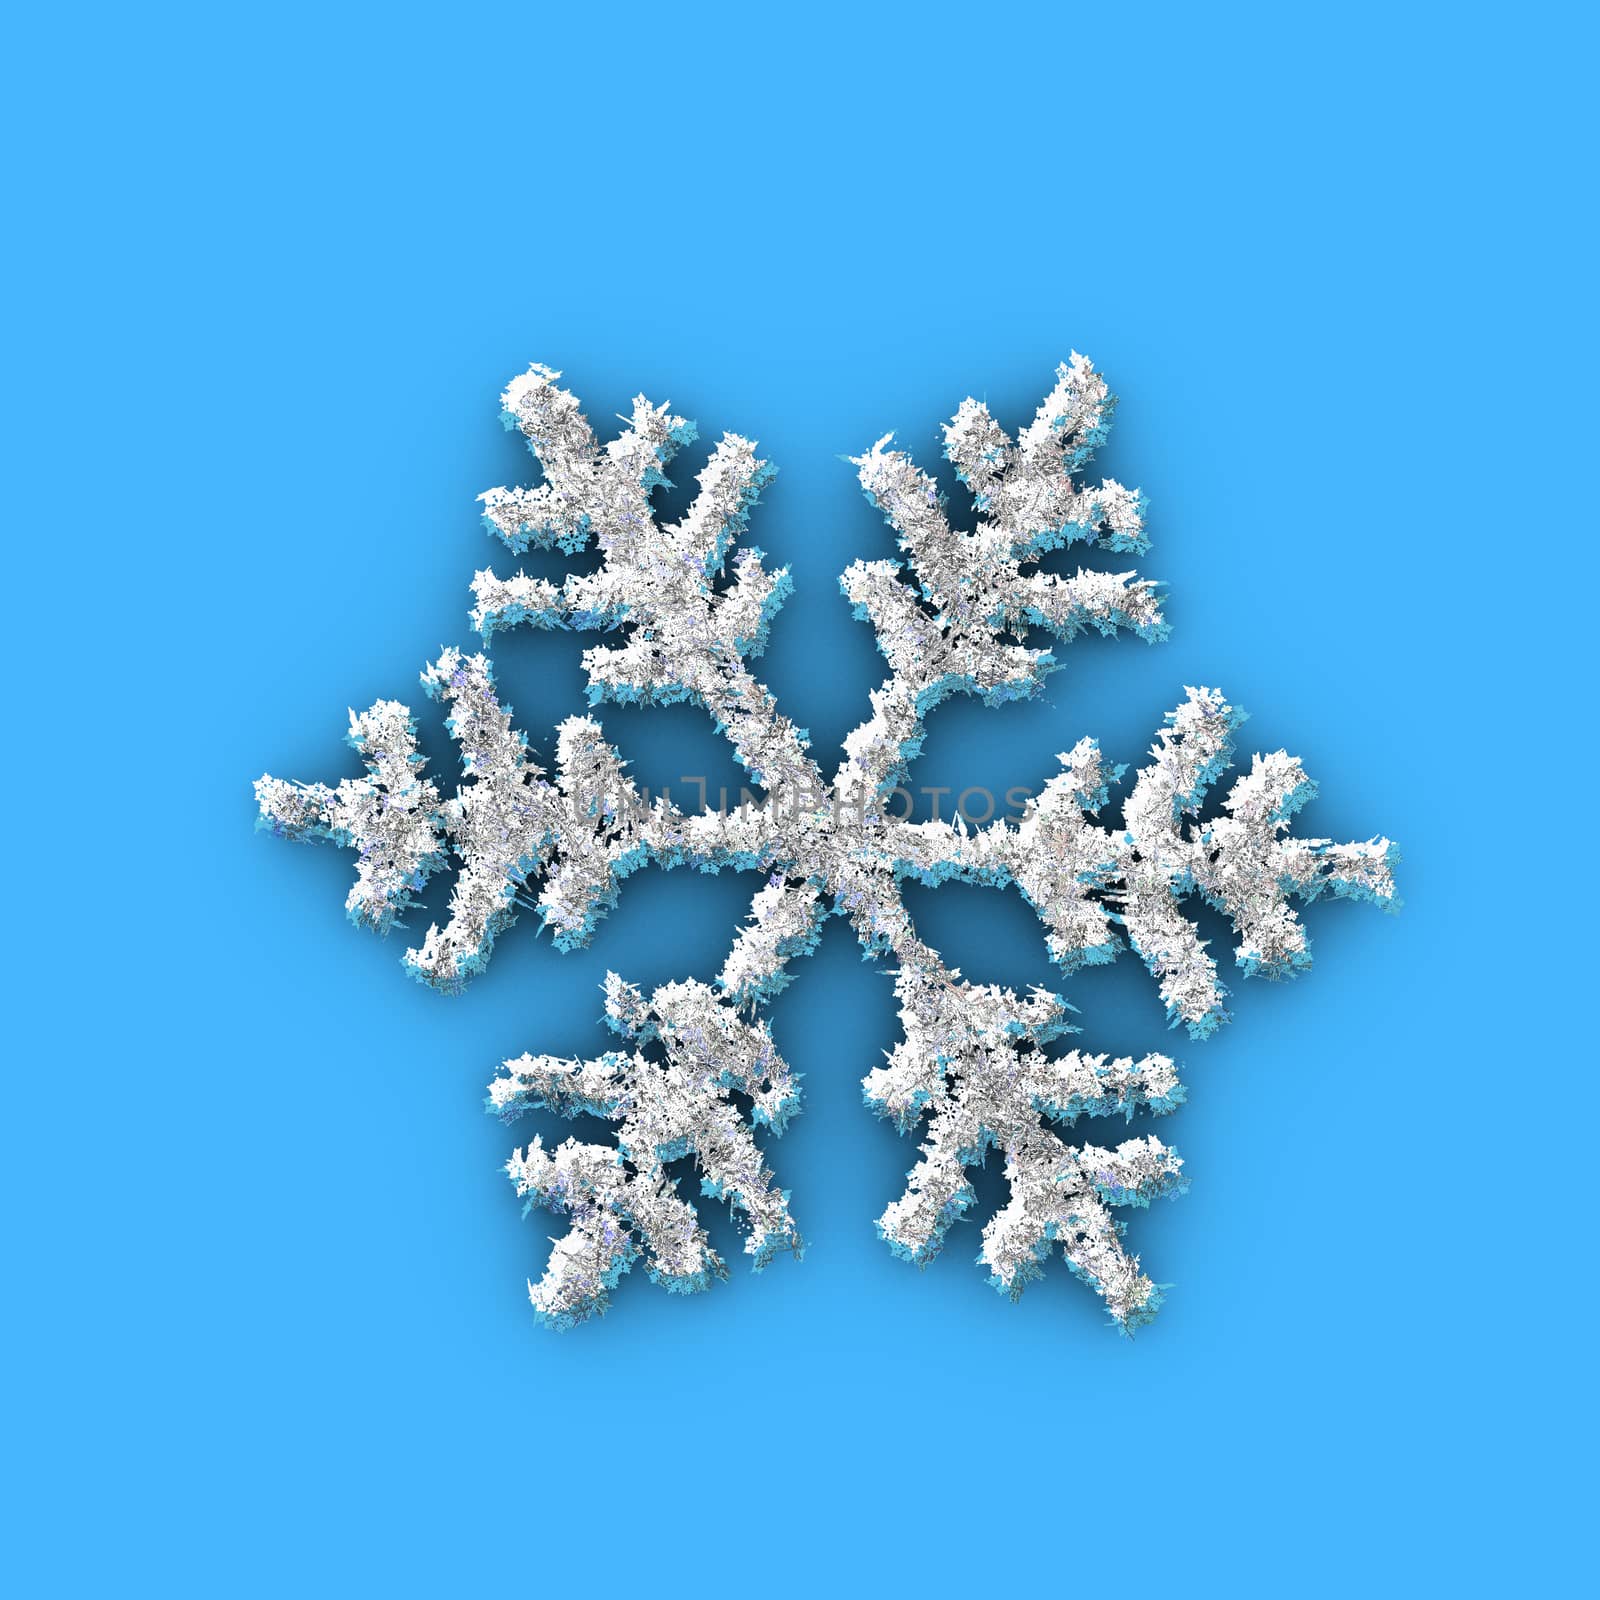 One snowflake made with several small snowflakes